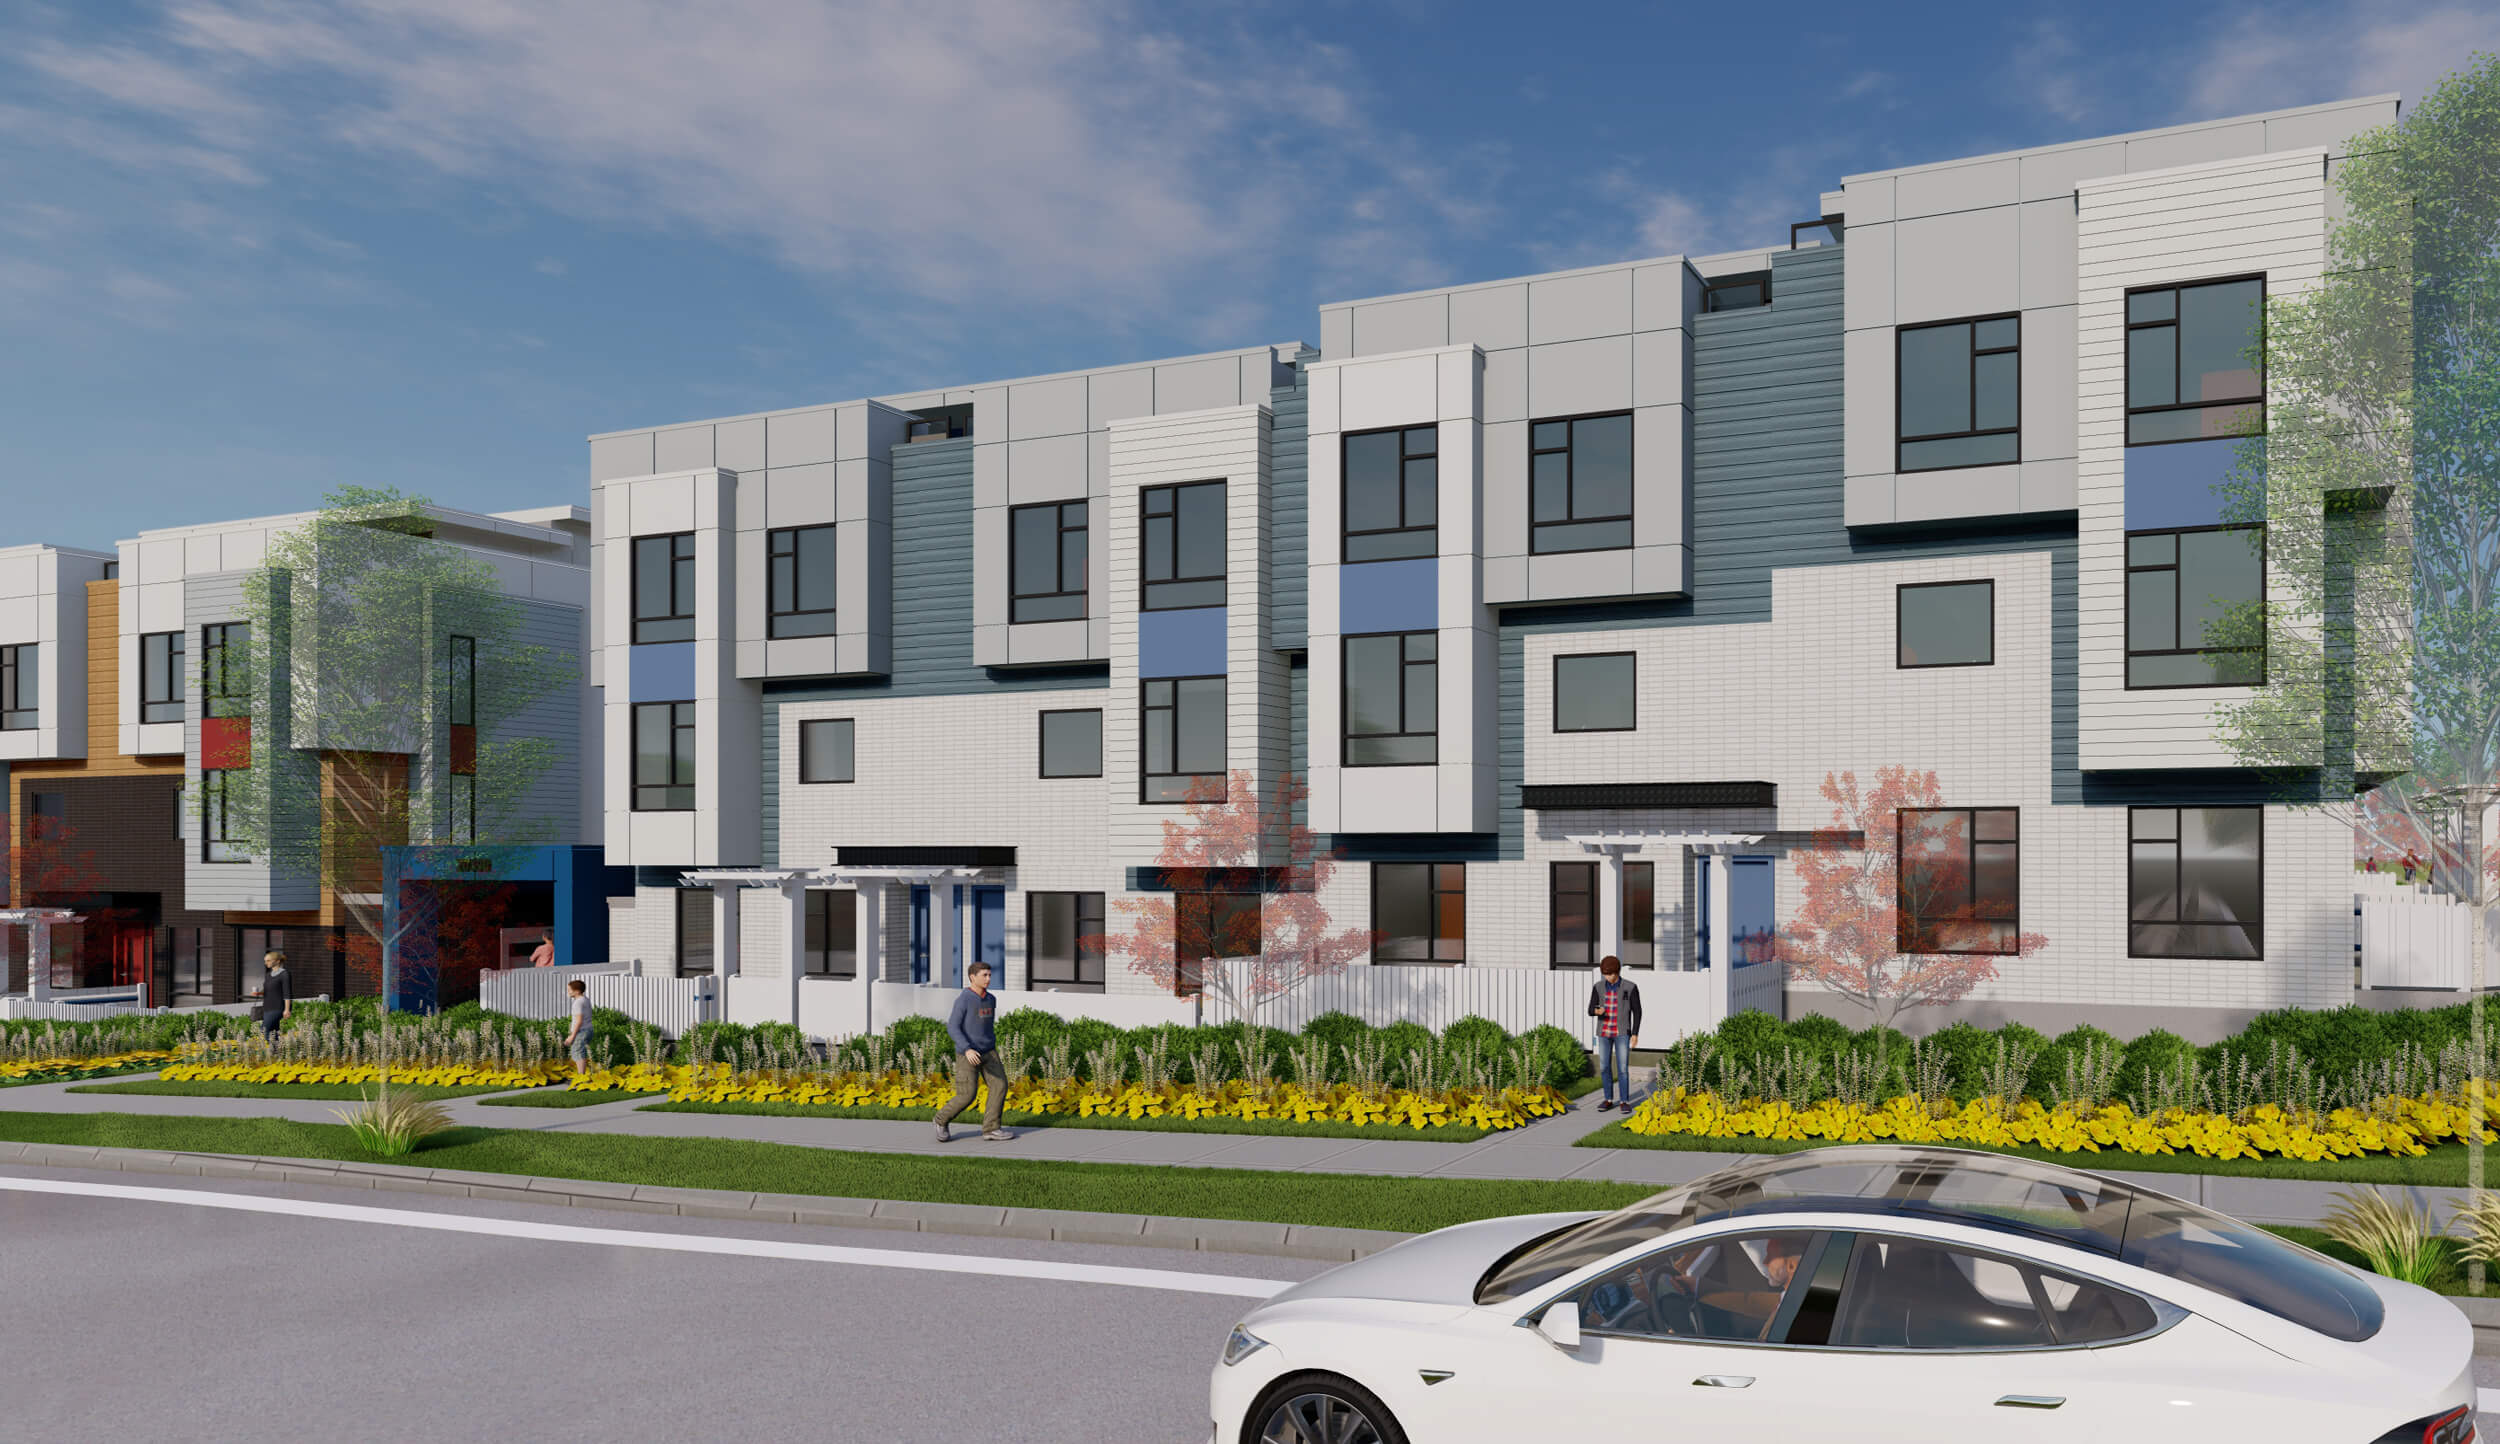 The “Central Gordon” development is a 4-storey residential condo project in Langley. Design by Group 161 | DF Architecture.